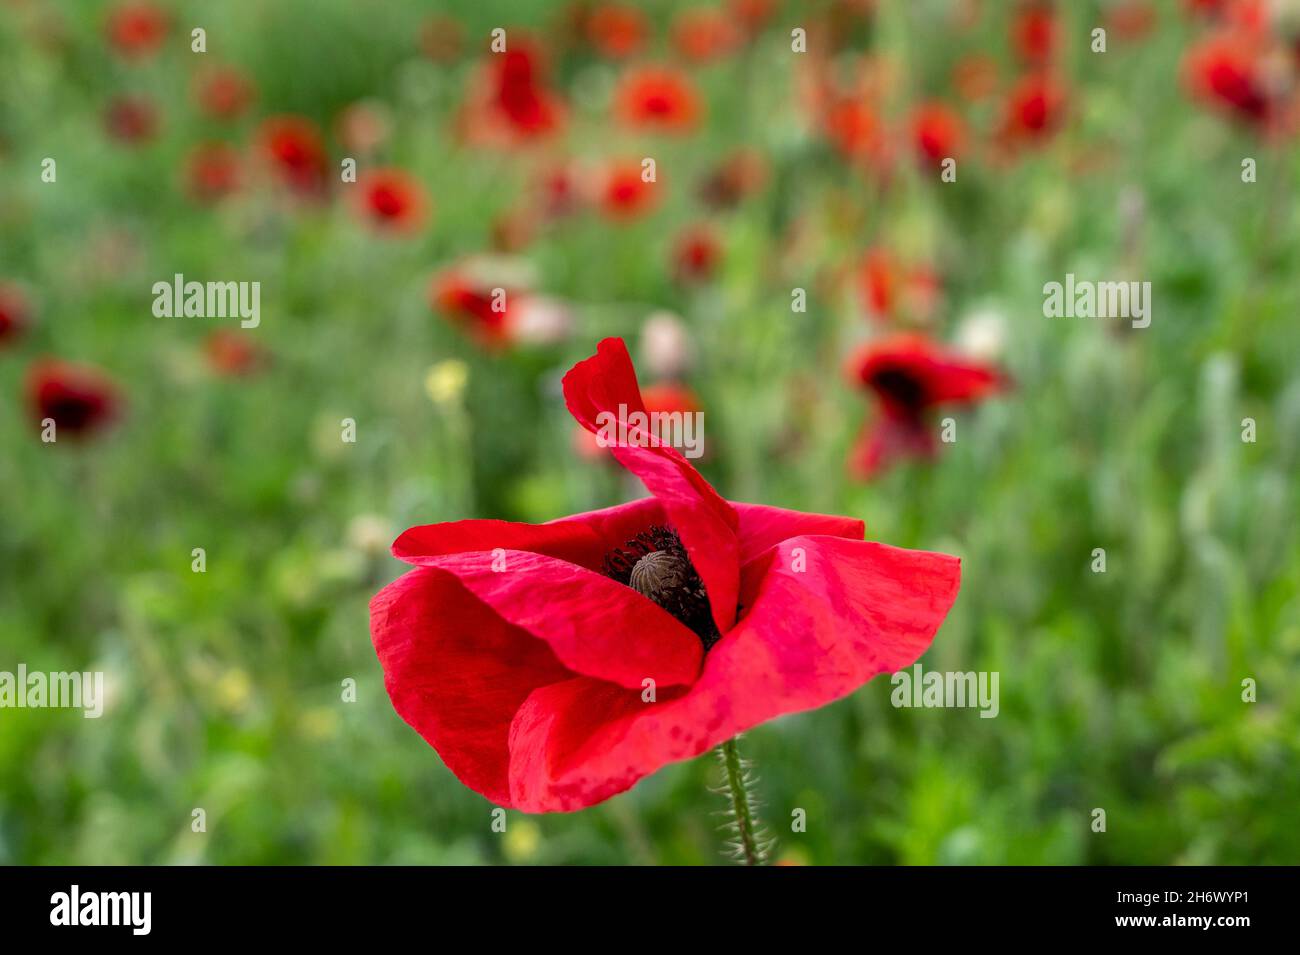 A red poppy, papaver rhoeas, in the foreground with more poppies behind. Stock Photo